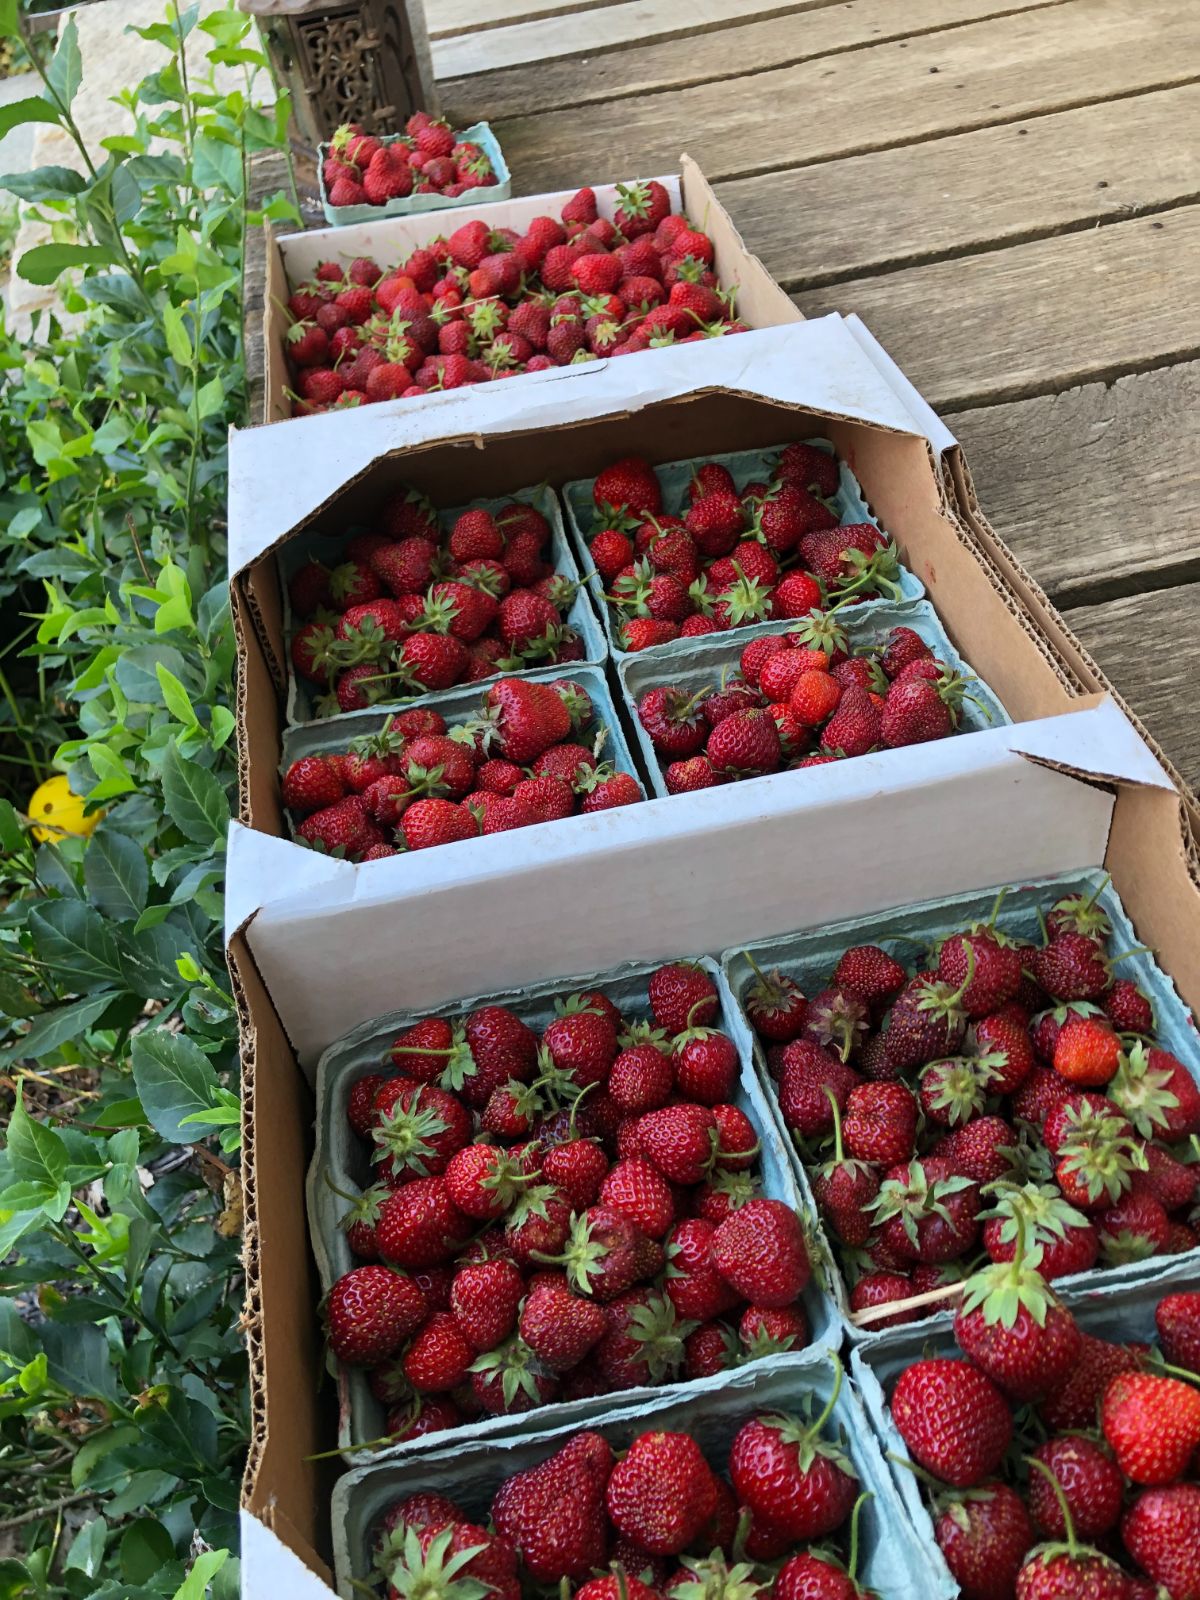 Strawberries in boxes and flats on a porch